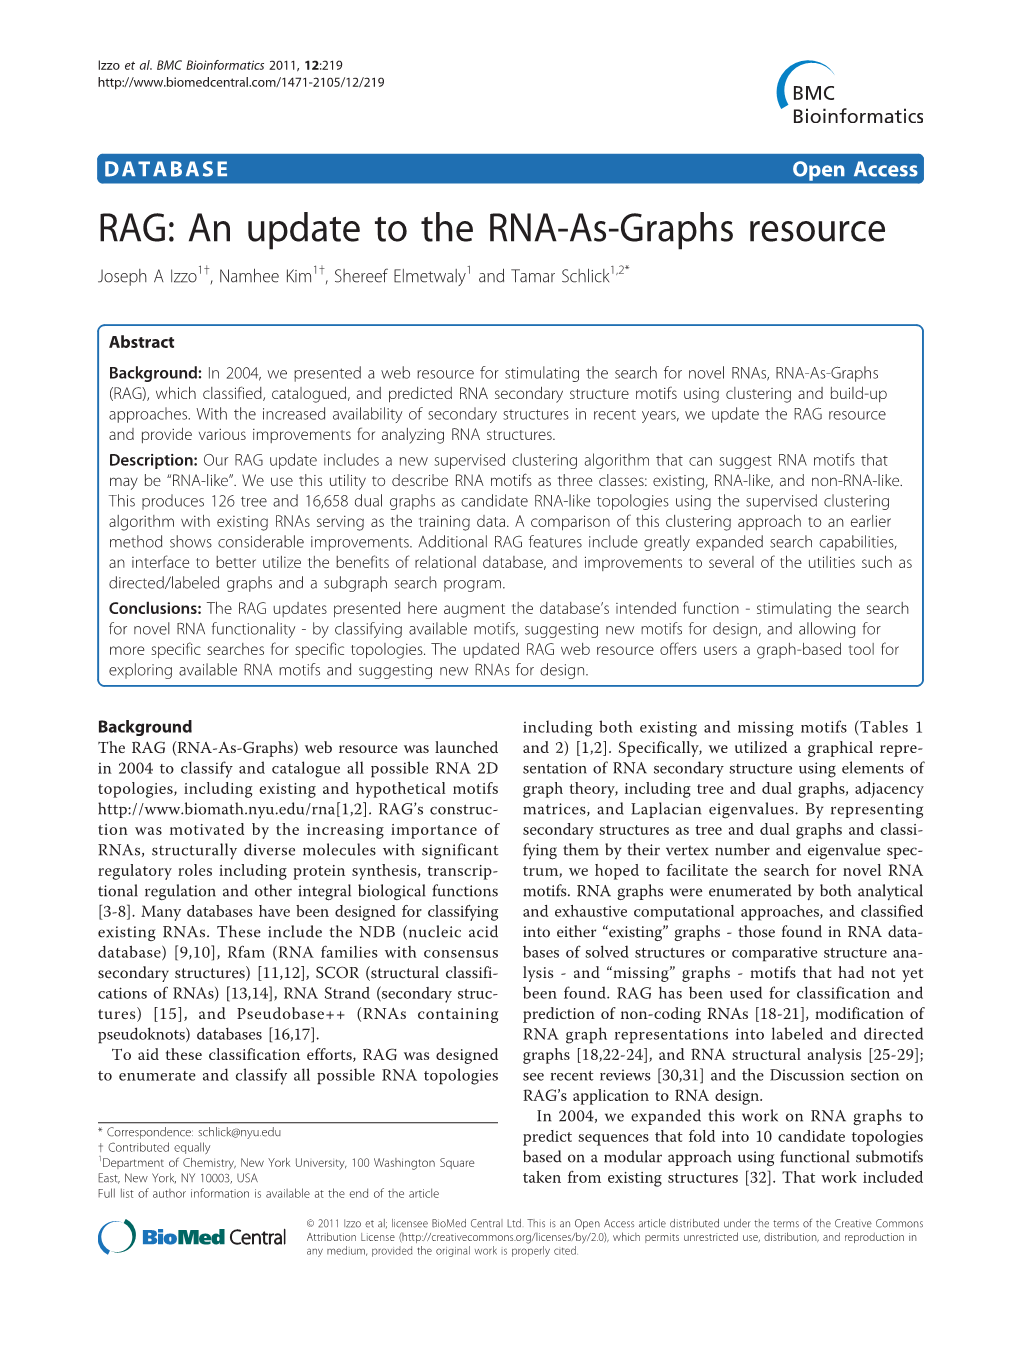 An Update to the RNA-As-Graphs Resource Joseph a Izzo1†, Namhee Kim1†, Shereef Elmetwaly1 and Tamar Schlick1,2*